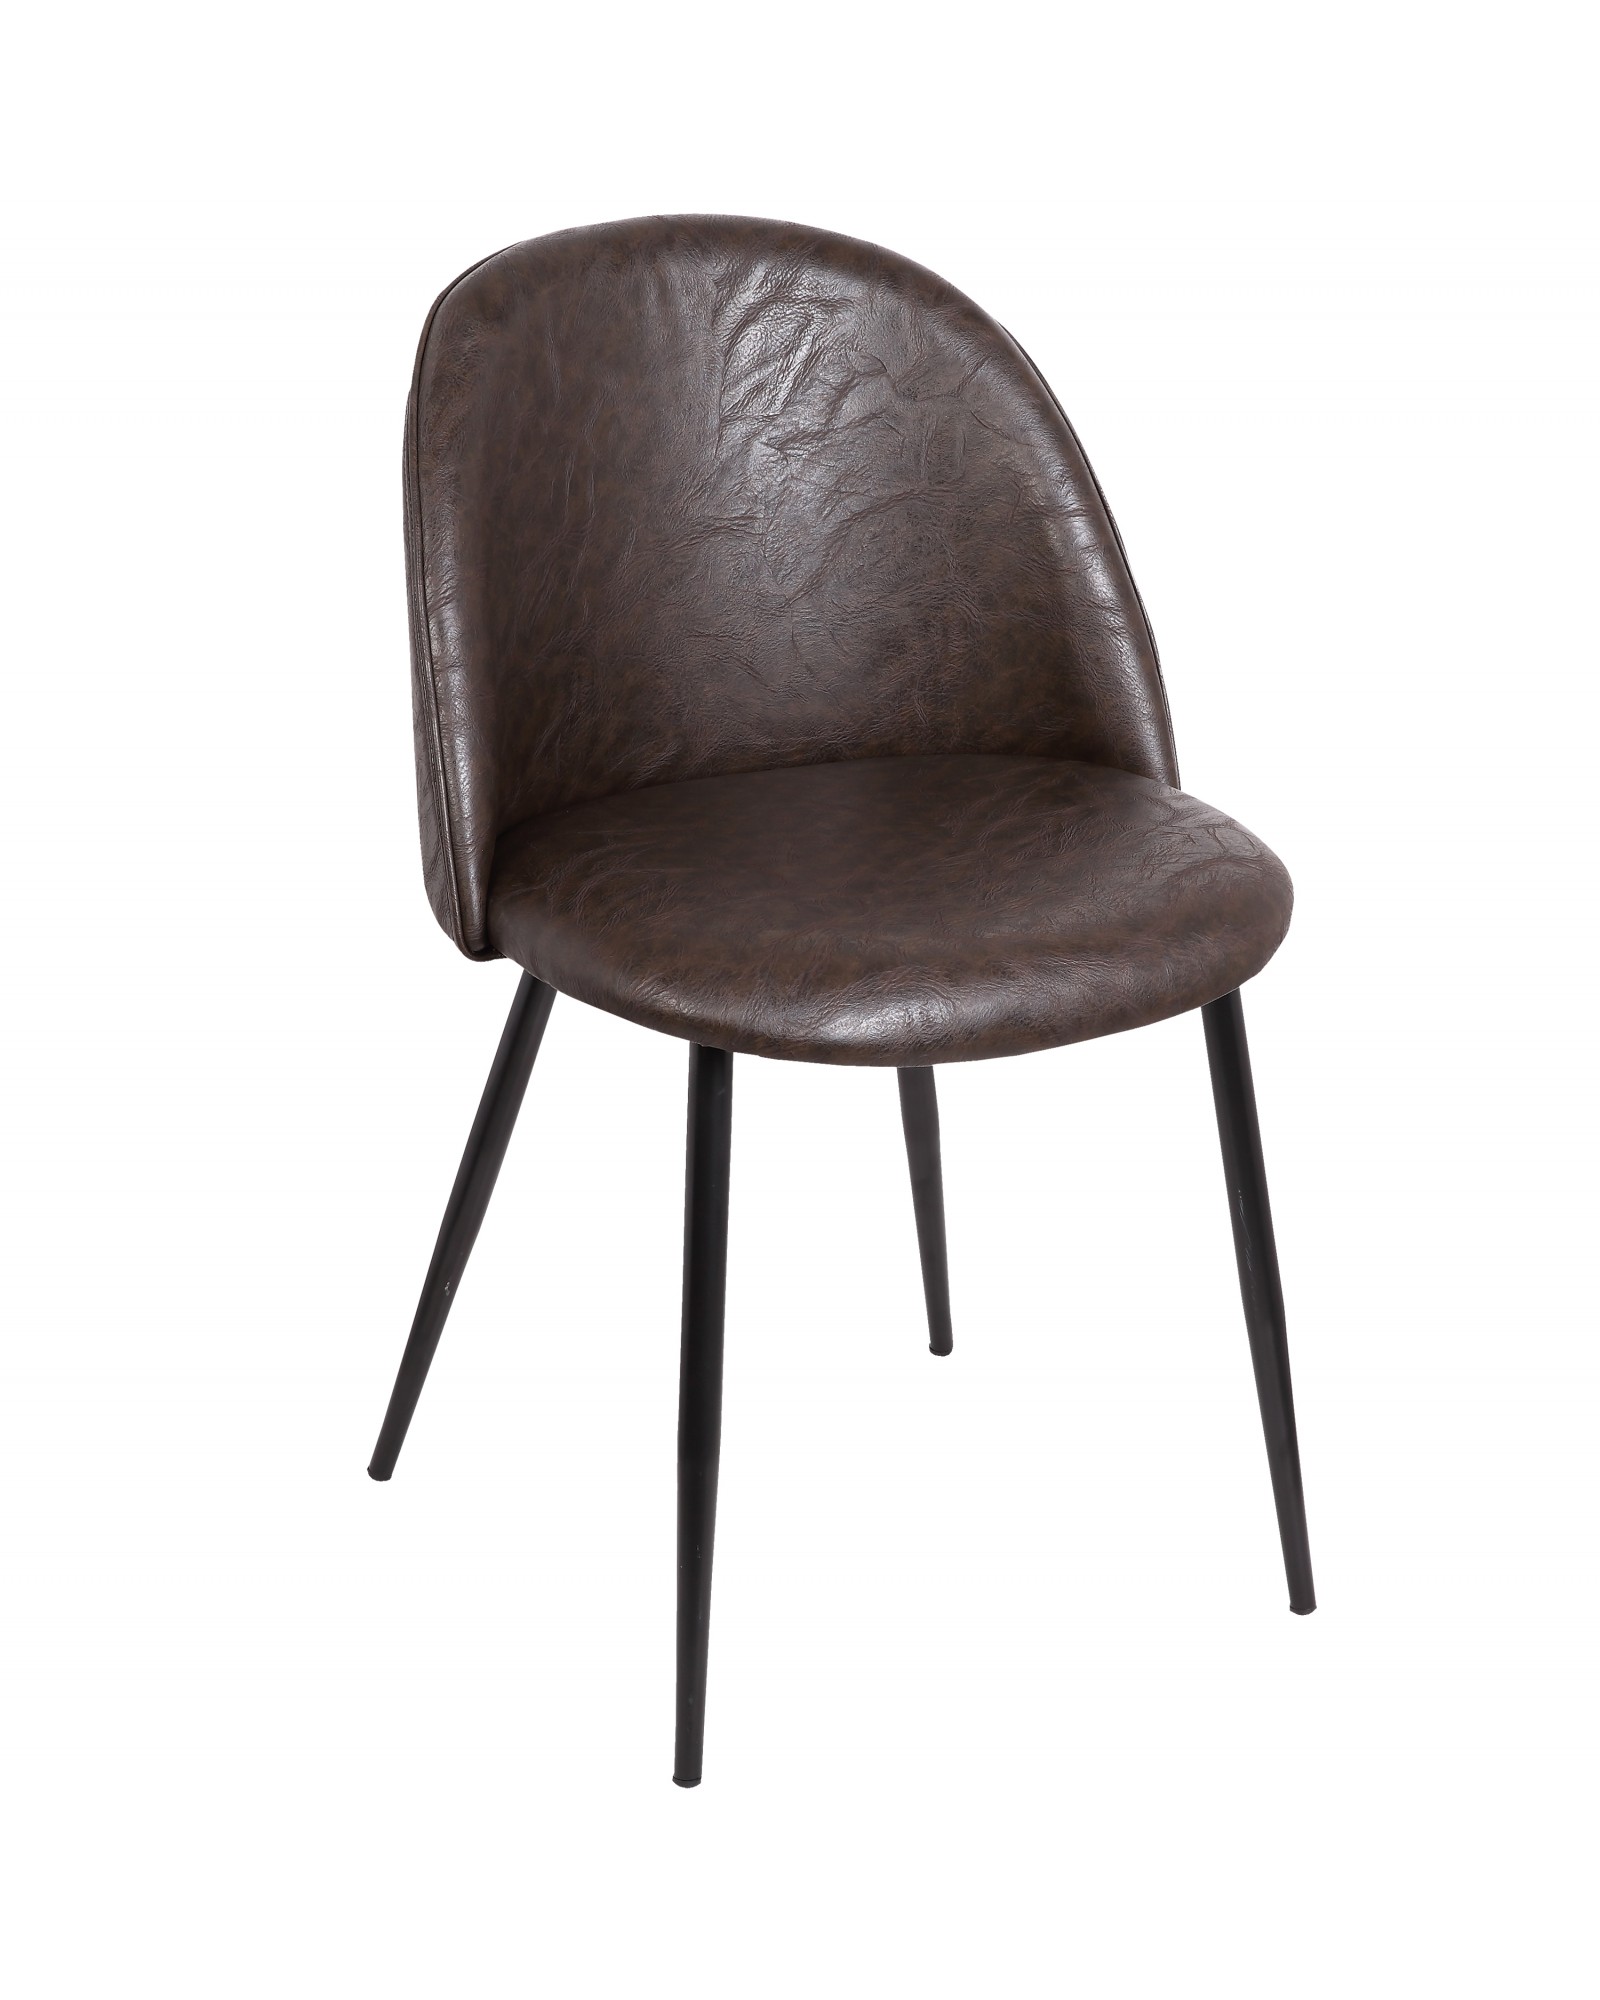 Luna Contemporary Dining/Accent Chair in Black with Brown Faux Leather - Set of 2